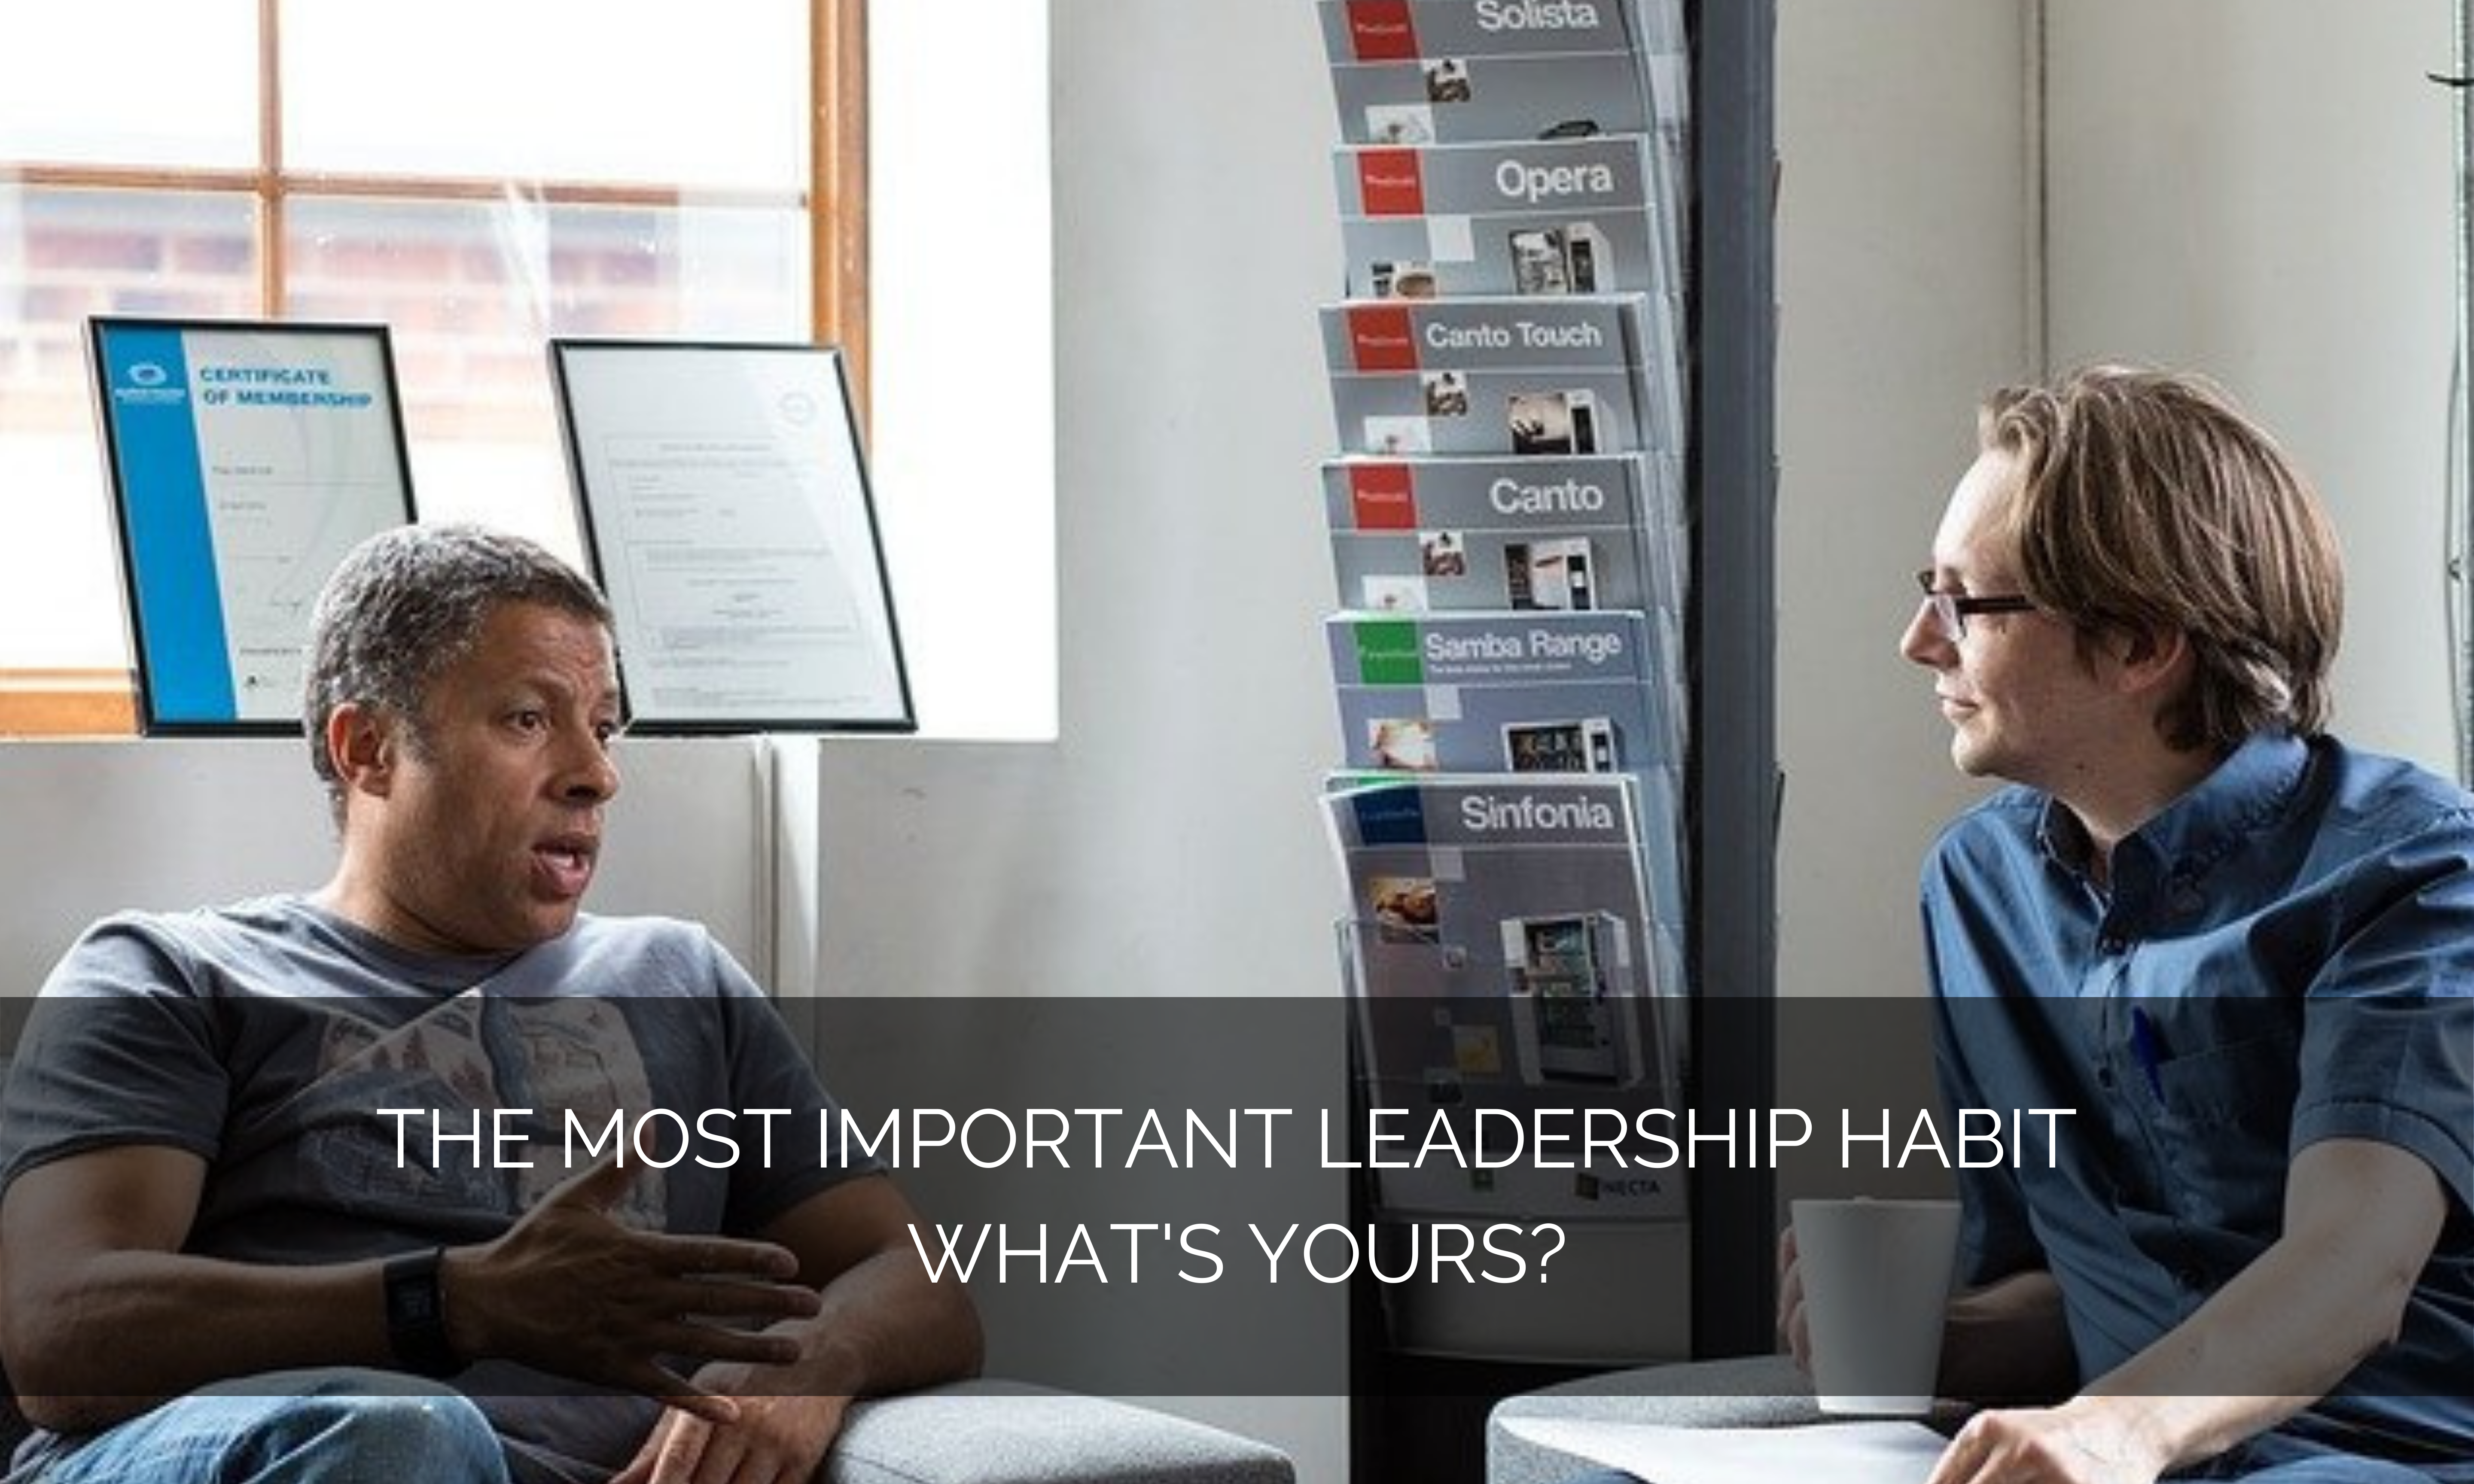 The most important leadership habit – what’s yours?